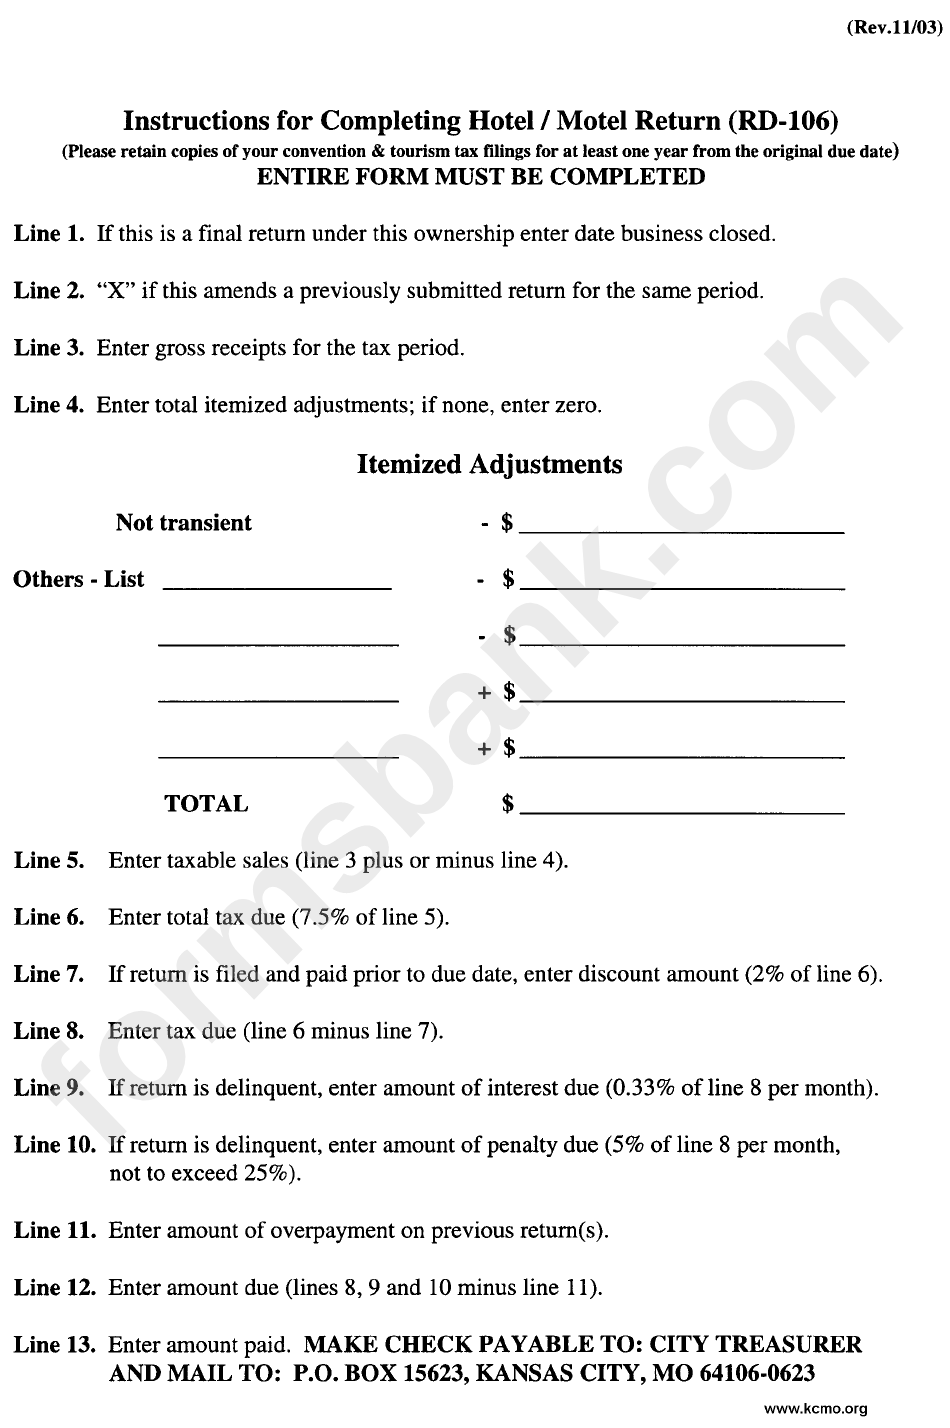 Instructions For Completing Hotel/motel Return (Form Rd-106) And Food Establishment (Form 107)